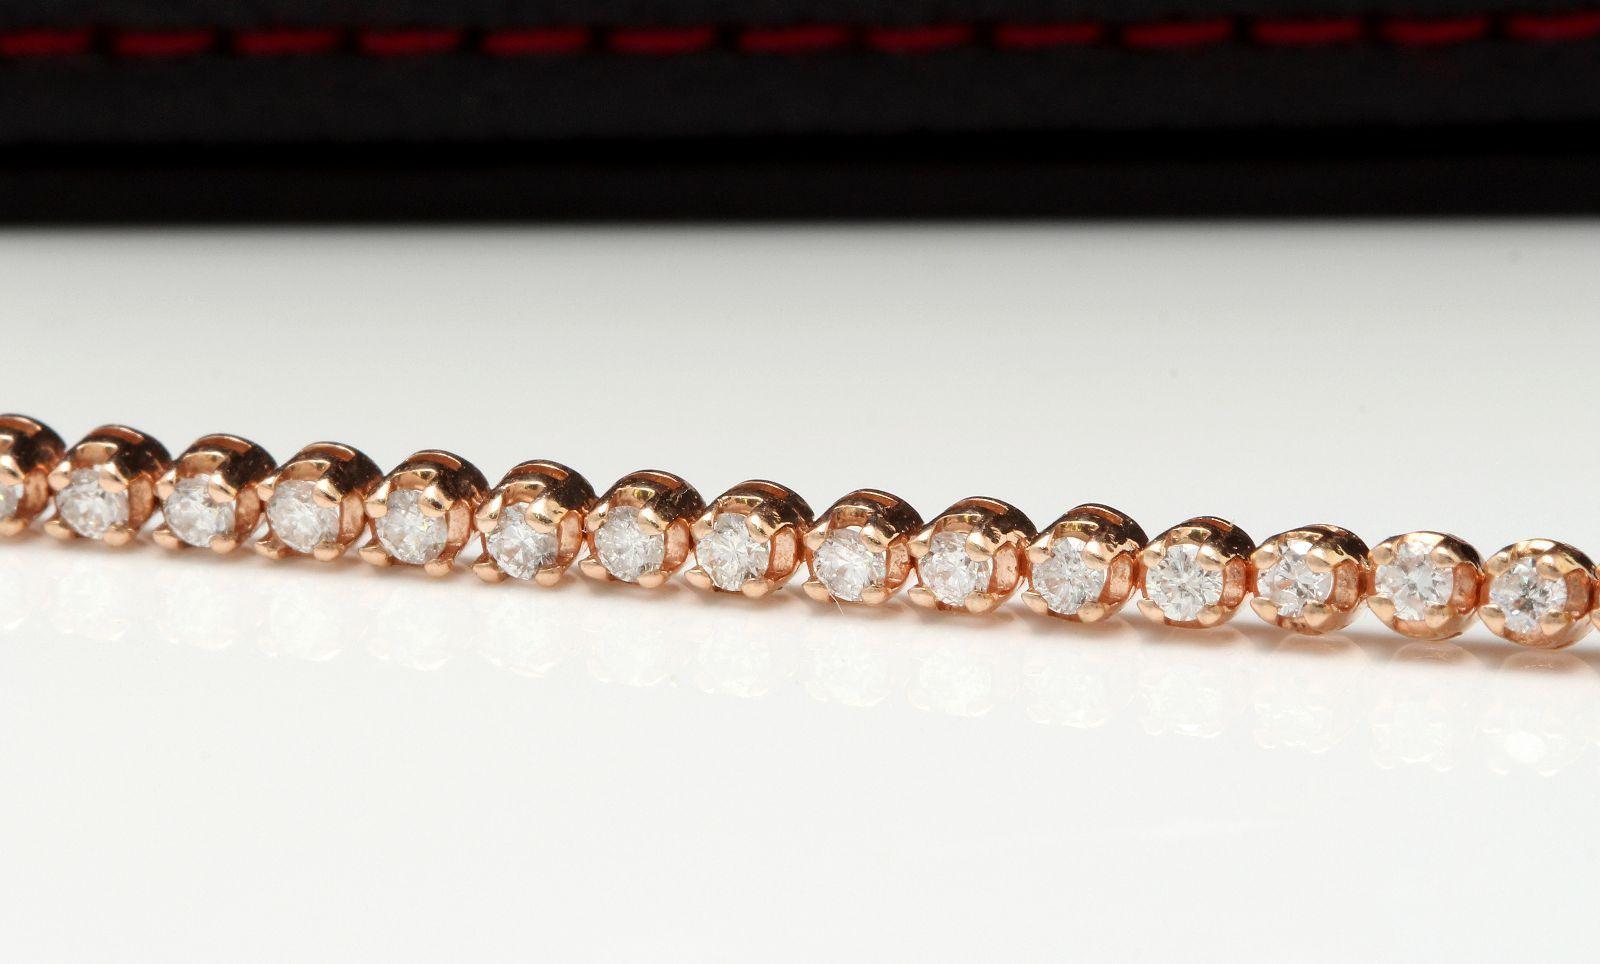 Very Impressive 2.32 Carats Natural Diamond 14K Solid Rose Gold Bracelet

STAMPED: 14K

Total Natural Round Diamonds Weight: 2.32 Carats (58 diamonds) (color G-H / Clarity SI1)

Bracelet Length: 7.25 inches

Width: 3.00mm

Bracelet total weight: